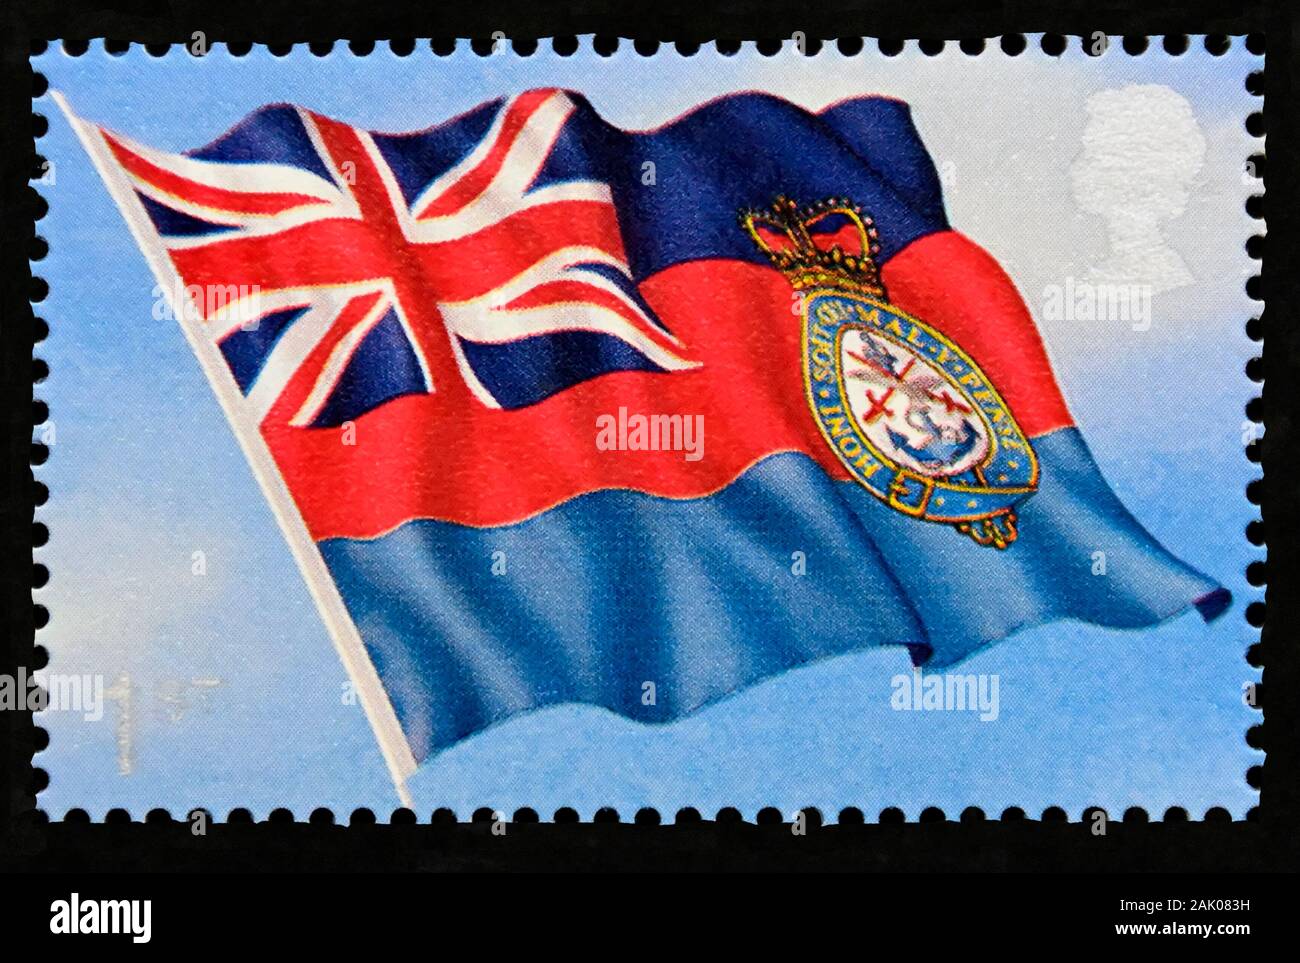 Postage stamp. Great Britain. Queen Elizabeth II. Centenary of Royal Navy Submarine Service. Flag of Chief of Defence Staff. 1st. class. 2001. Stock Photo